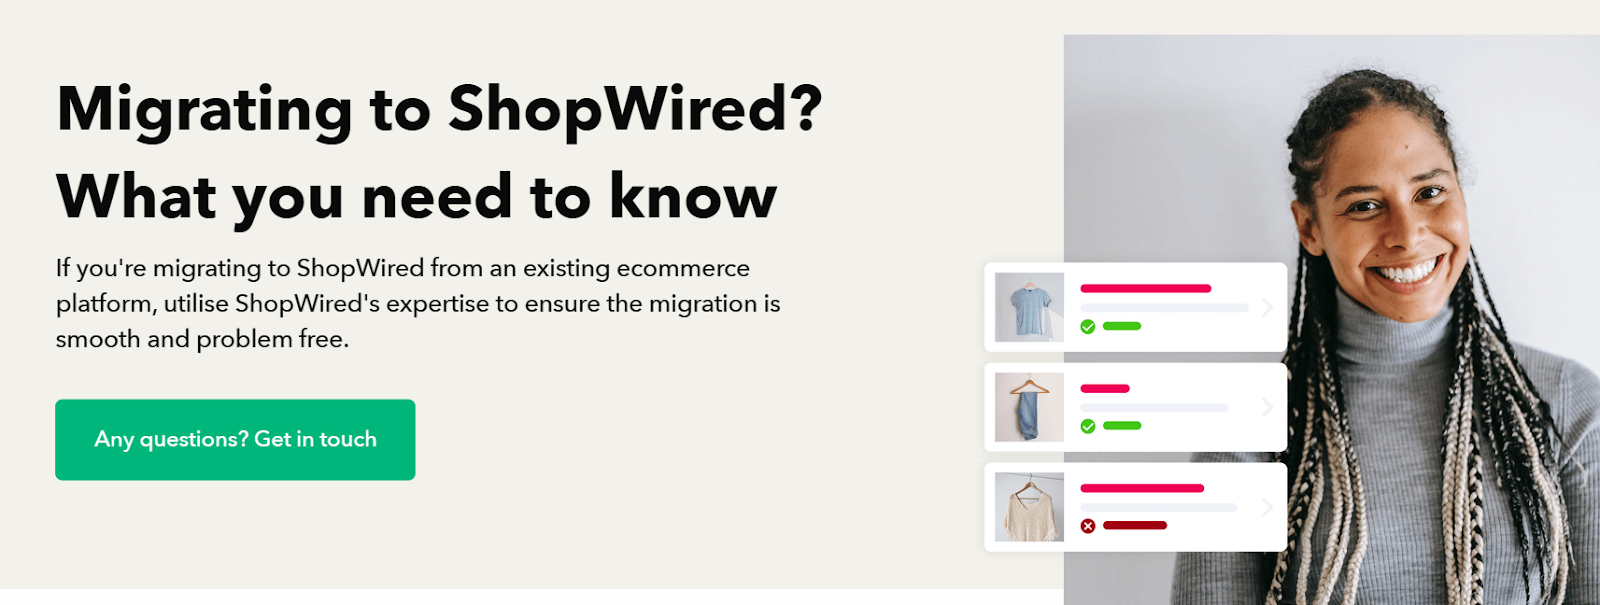 Migrating to ShopWired